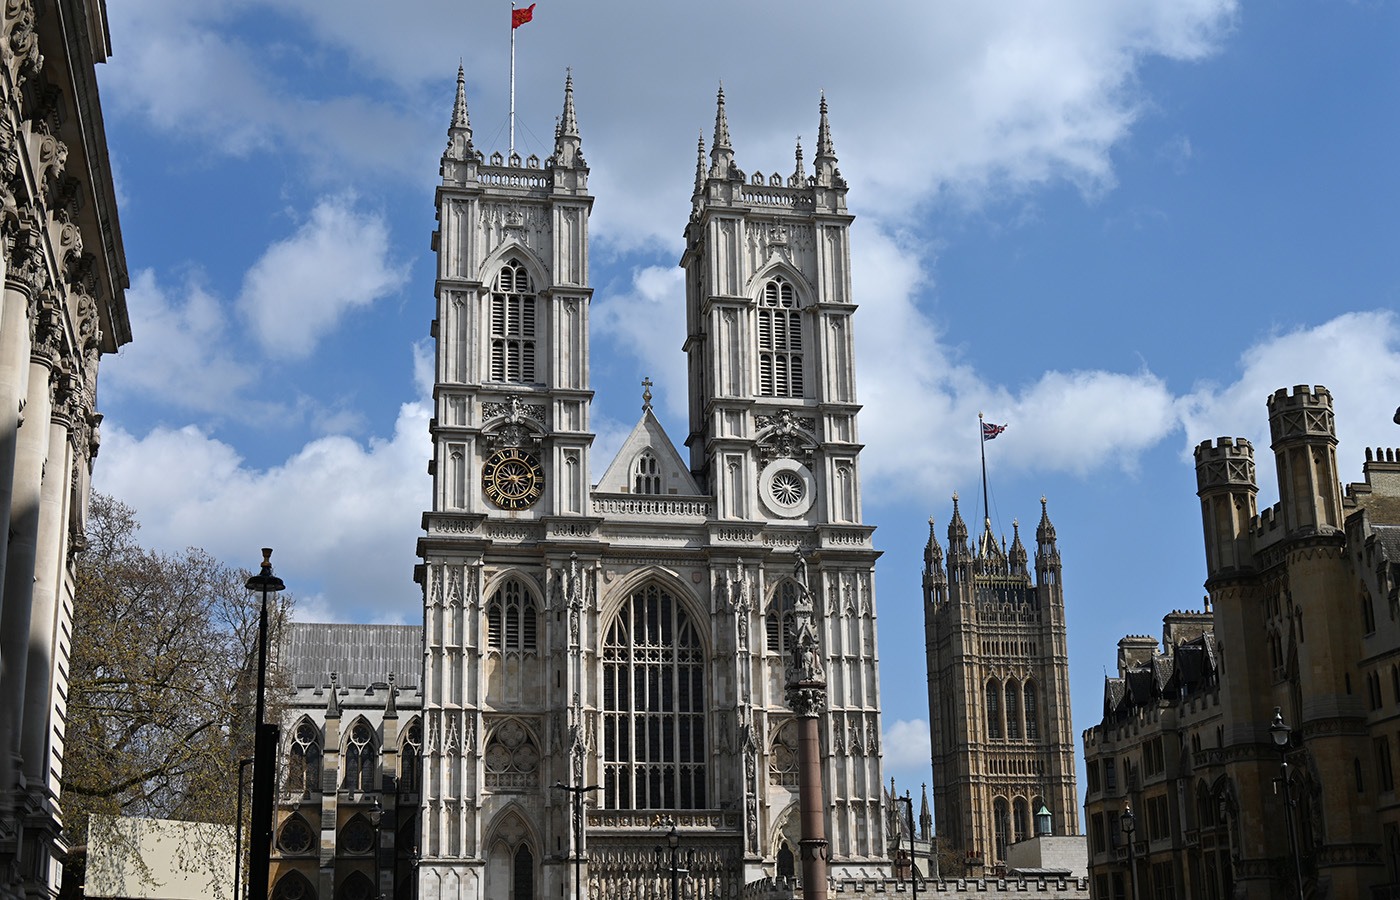 Westminster Abbey, the ancient cathedral in London where the King will be crowned